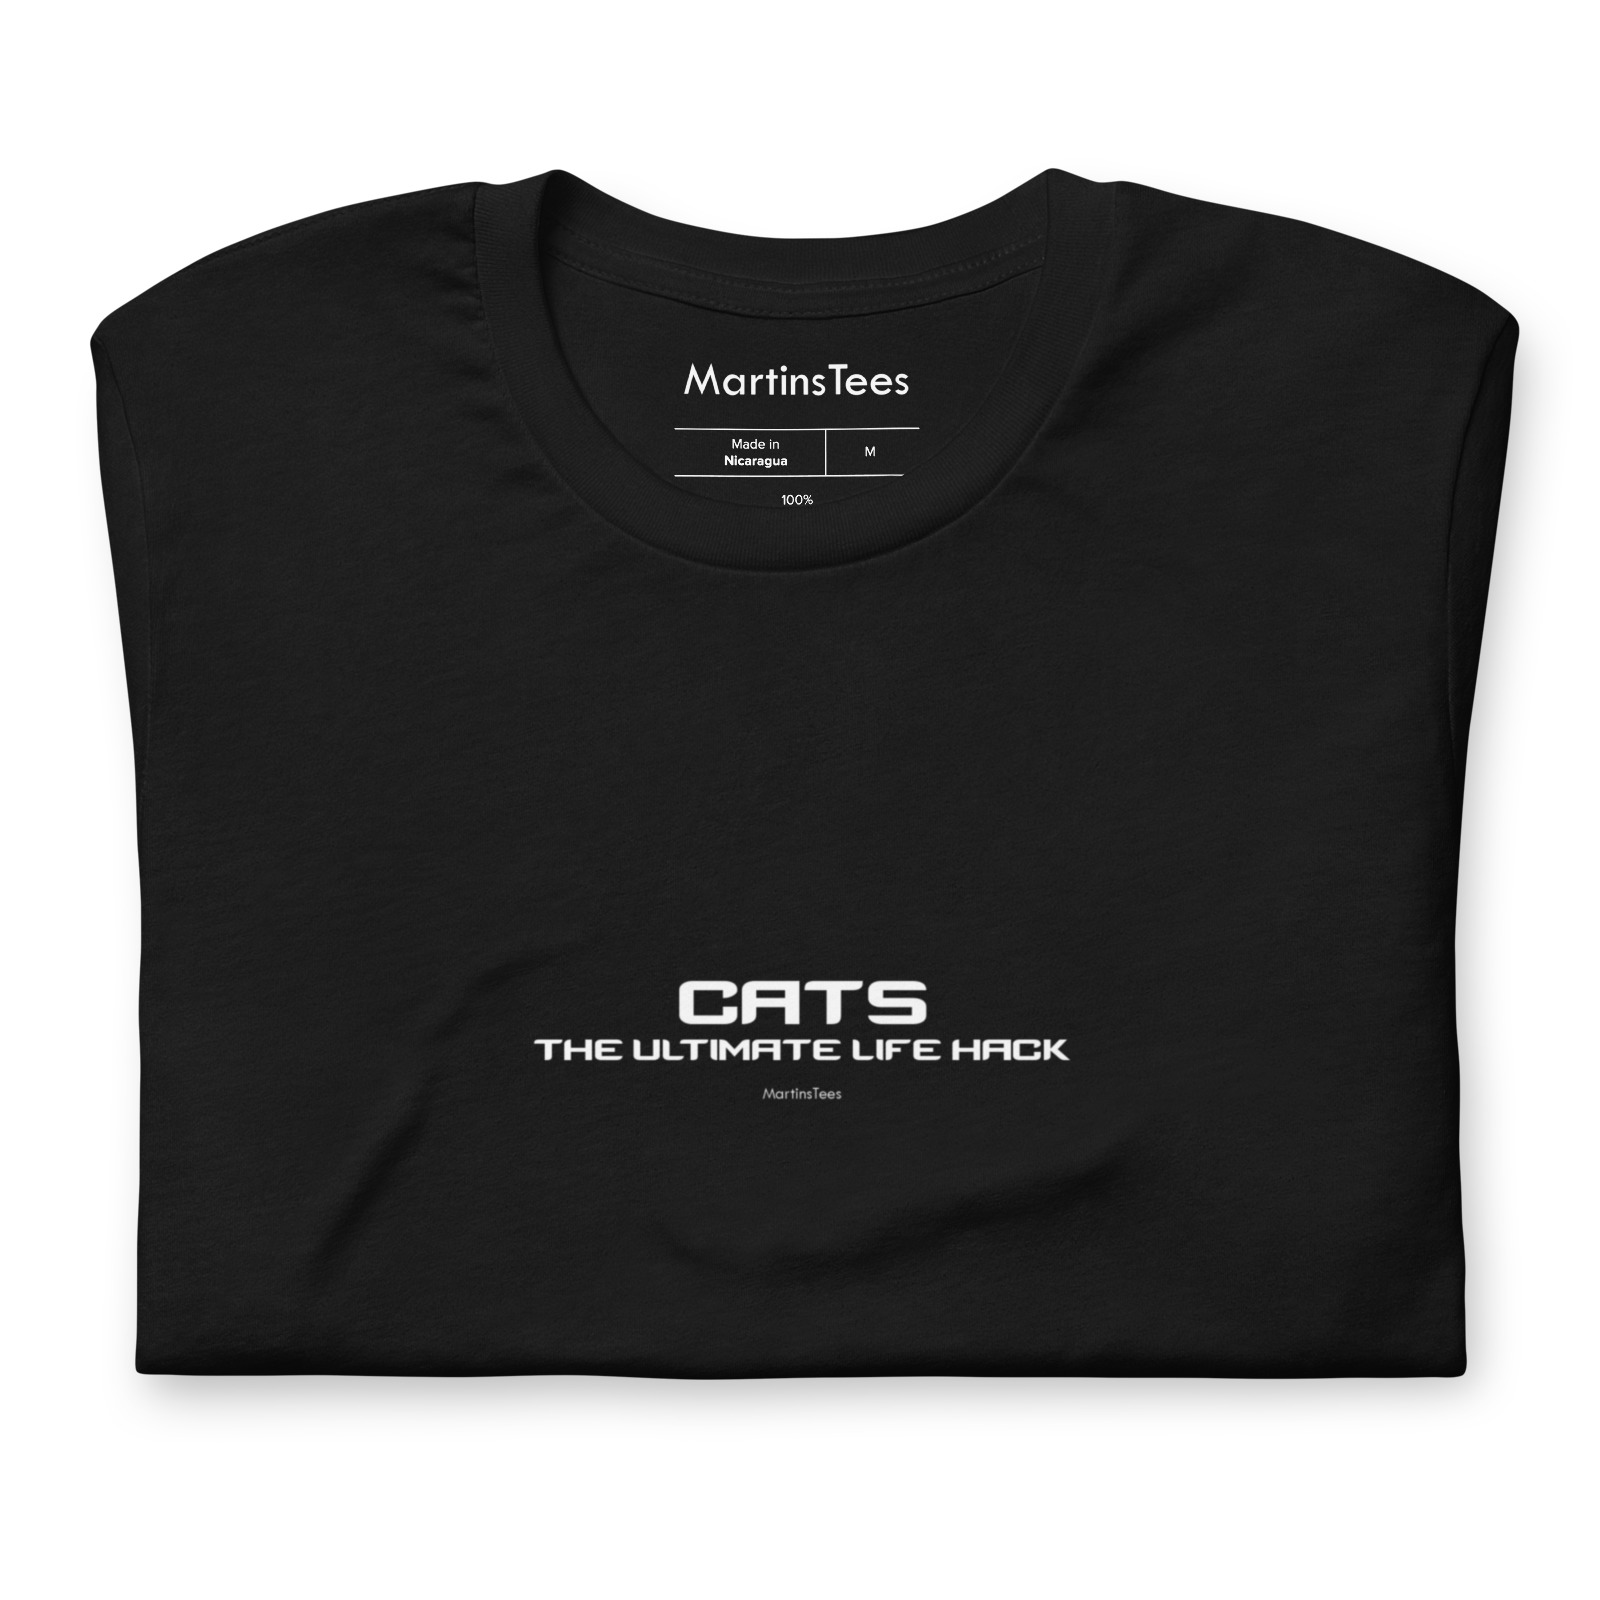 T-shirt: CATS - THE ULTIMATE LIFE HACK